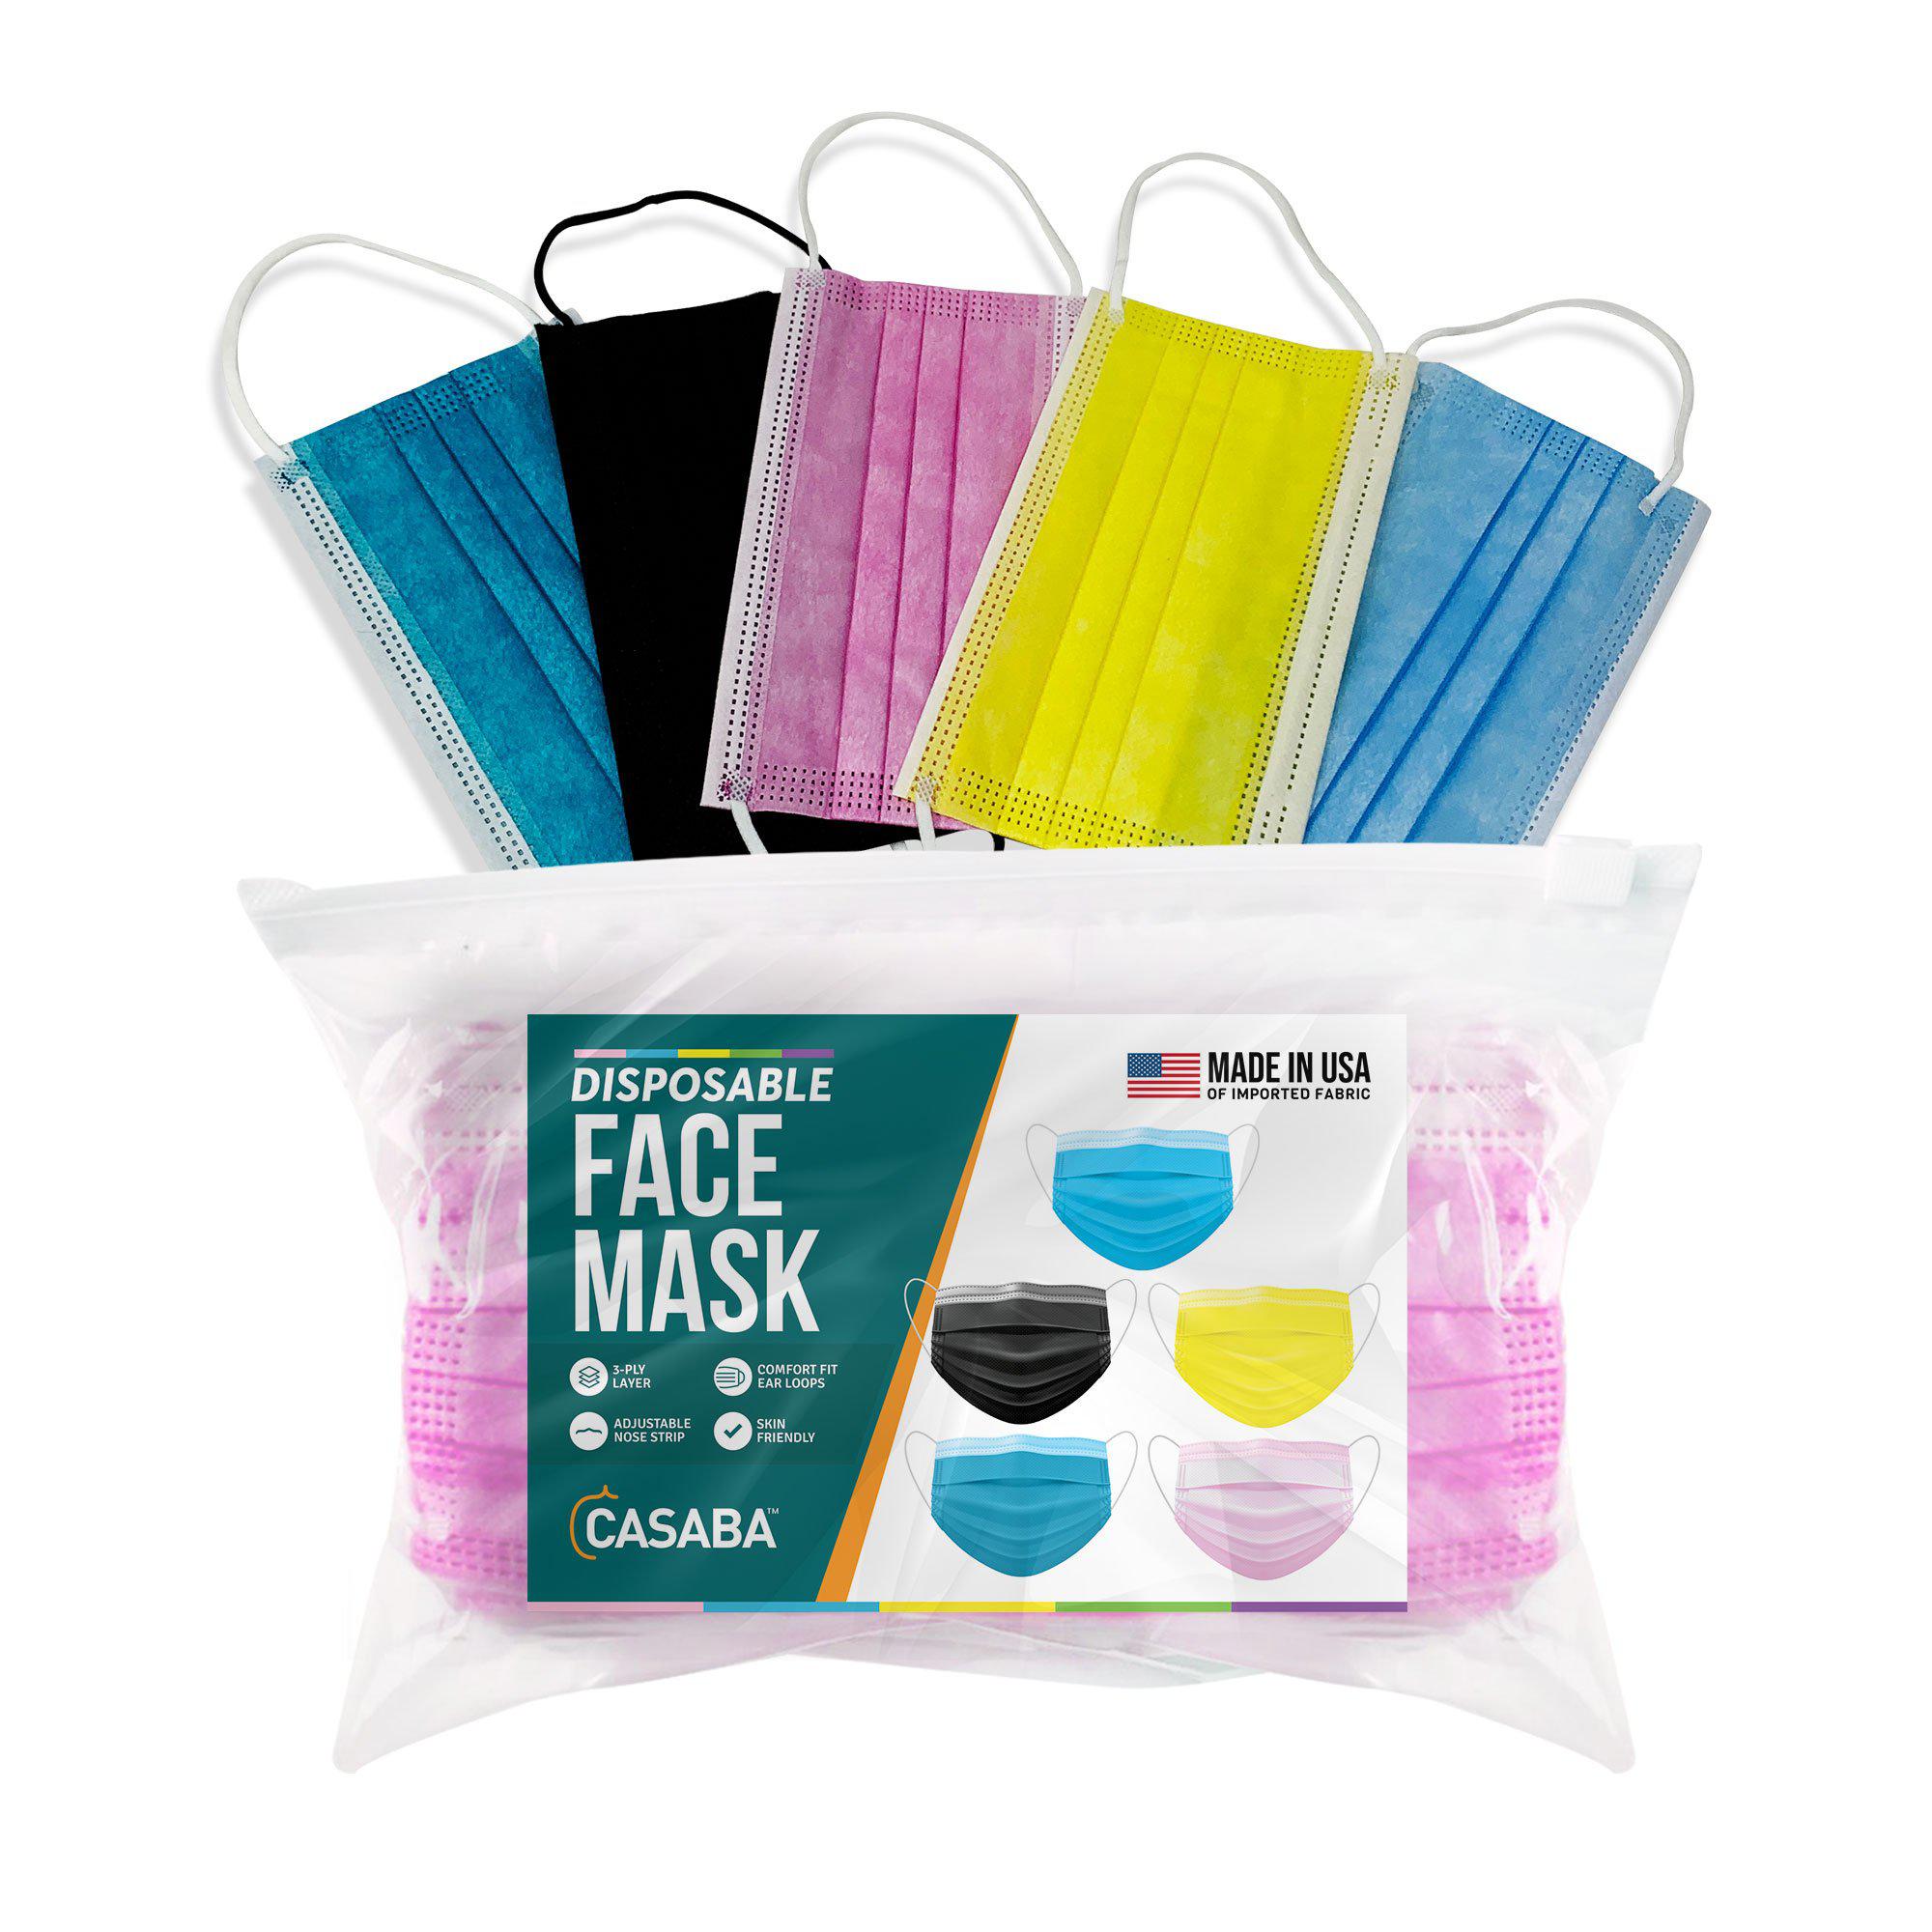 Casaba 50 Pack with 5 Colors Disposable Face Masks 3-Ply - Made in USA with Imported Fabric